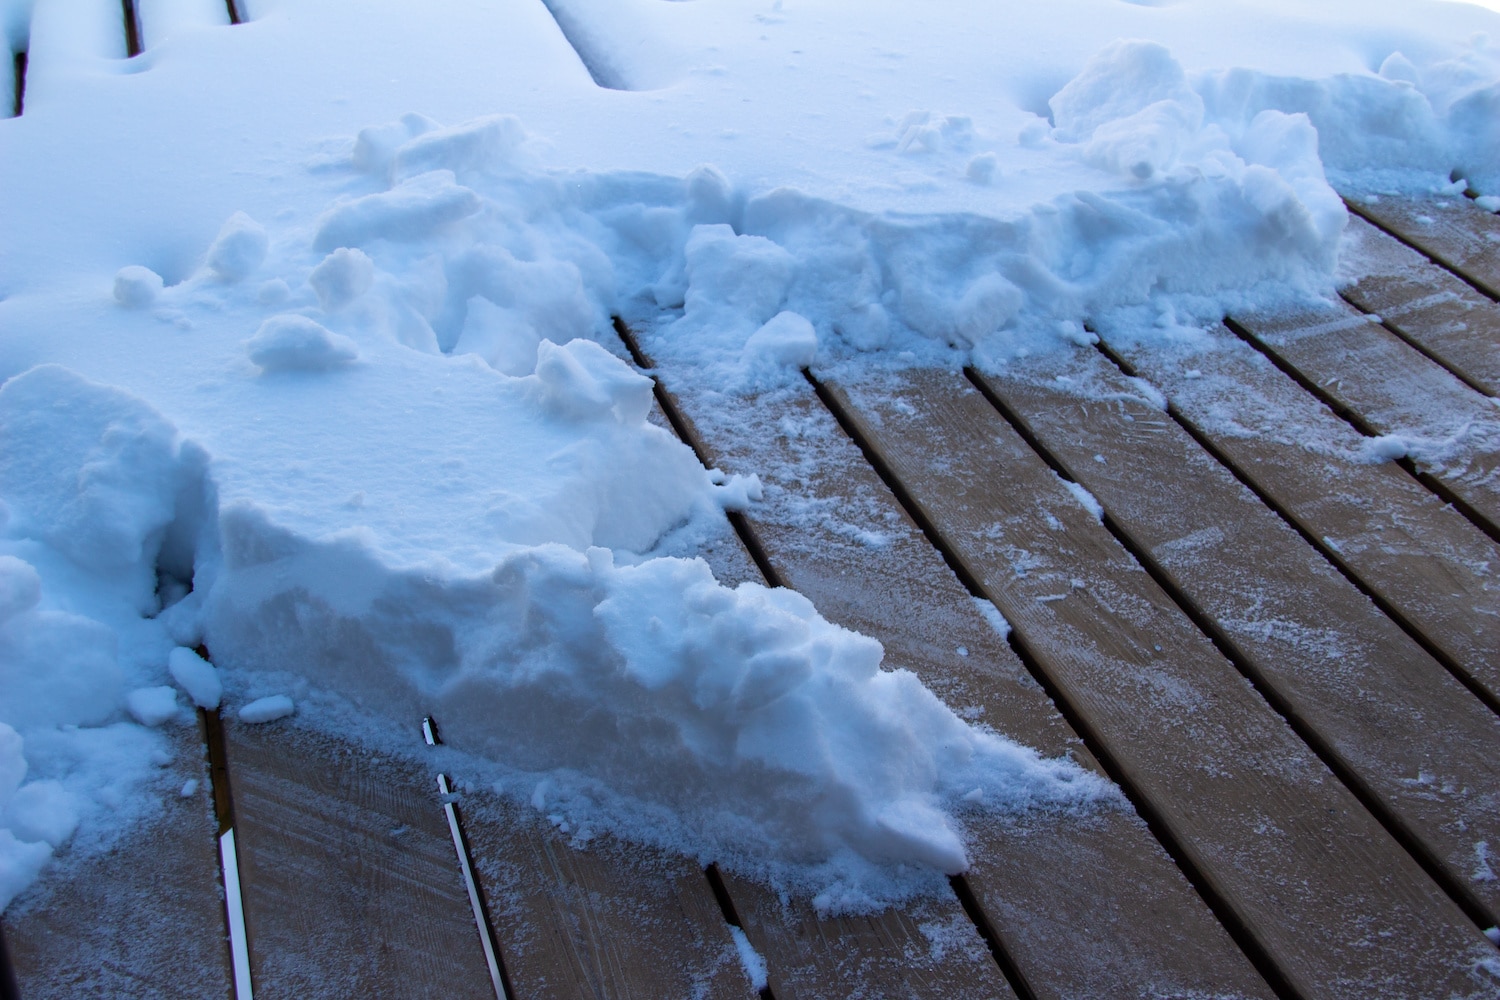 How to Make an Ice Melt For Your Wooden Deck